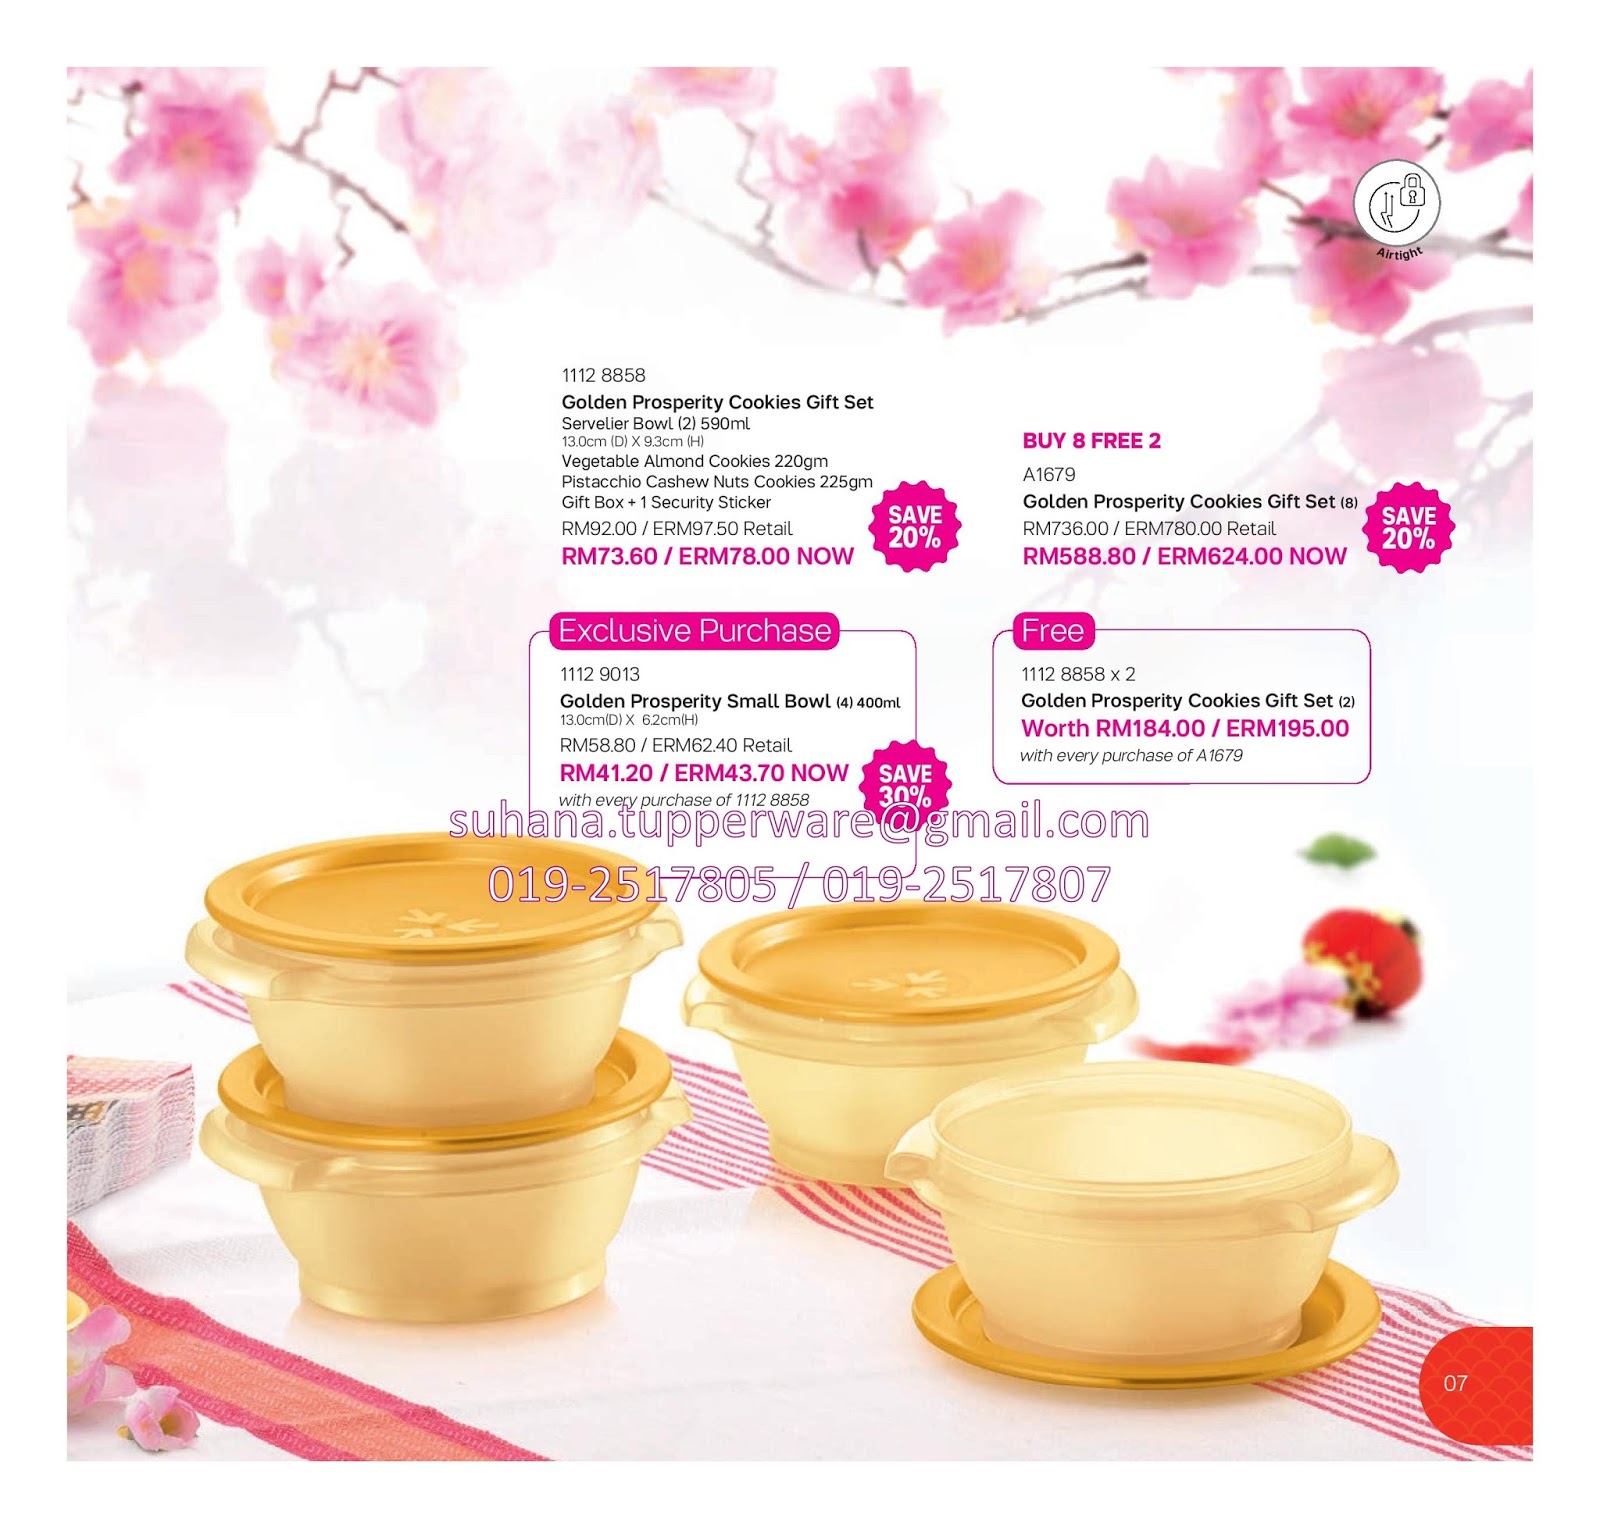 Tupperware Brands Malaysia Online | Catalogue | Collection | Business Opportunity |: Tupperware ...